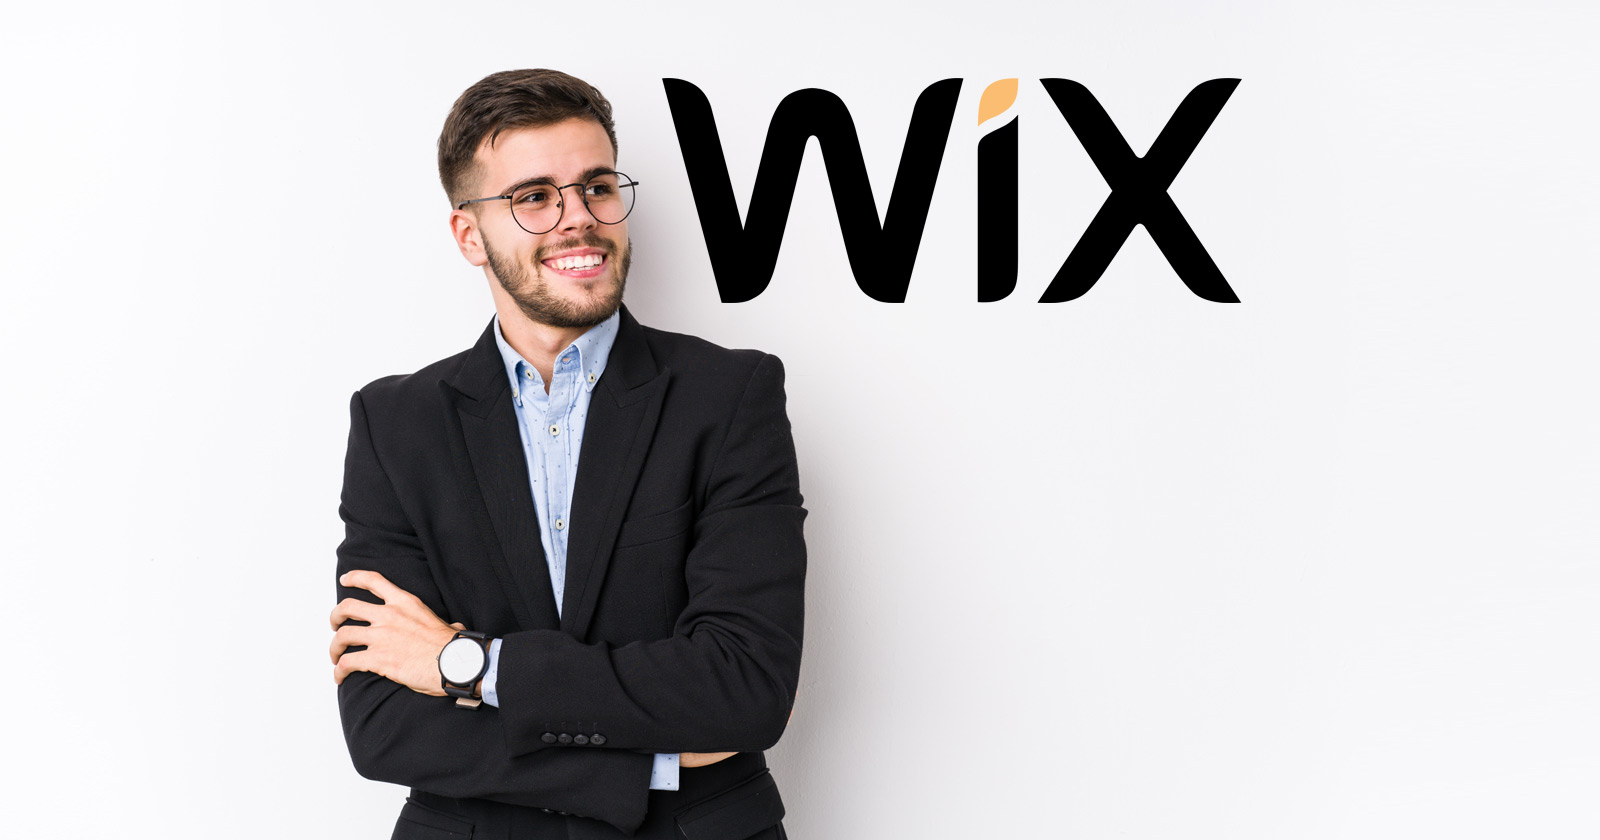 Wix has changed the way websites are built and why you should care